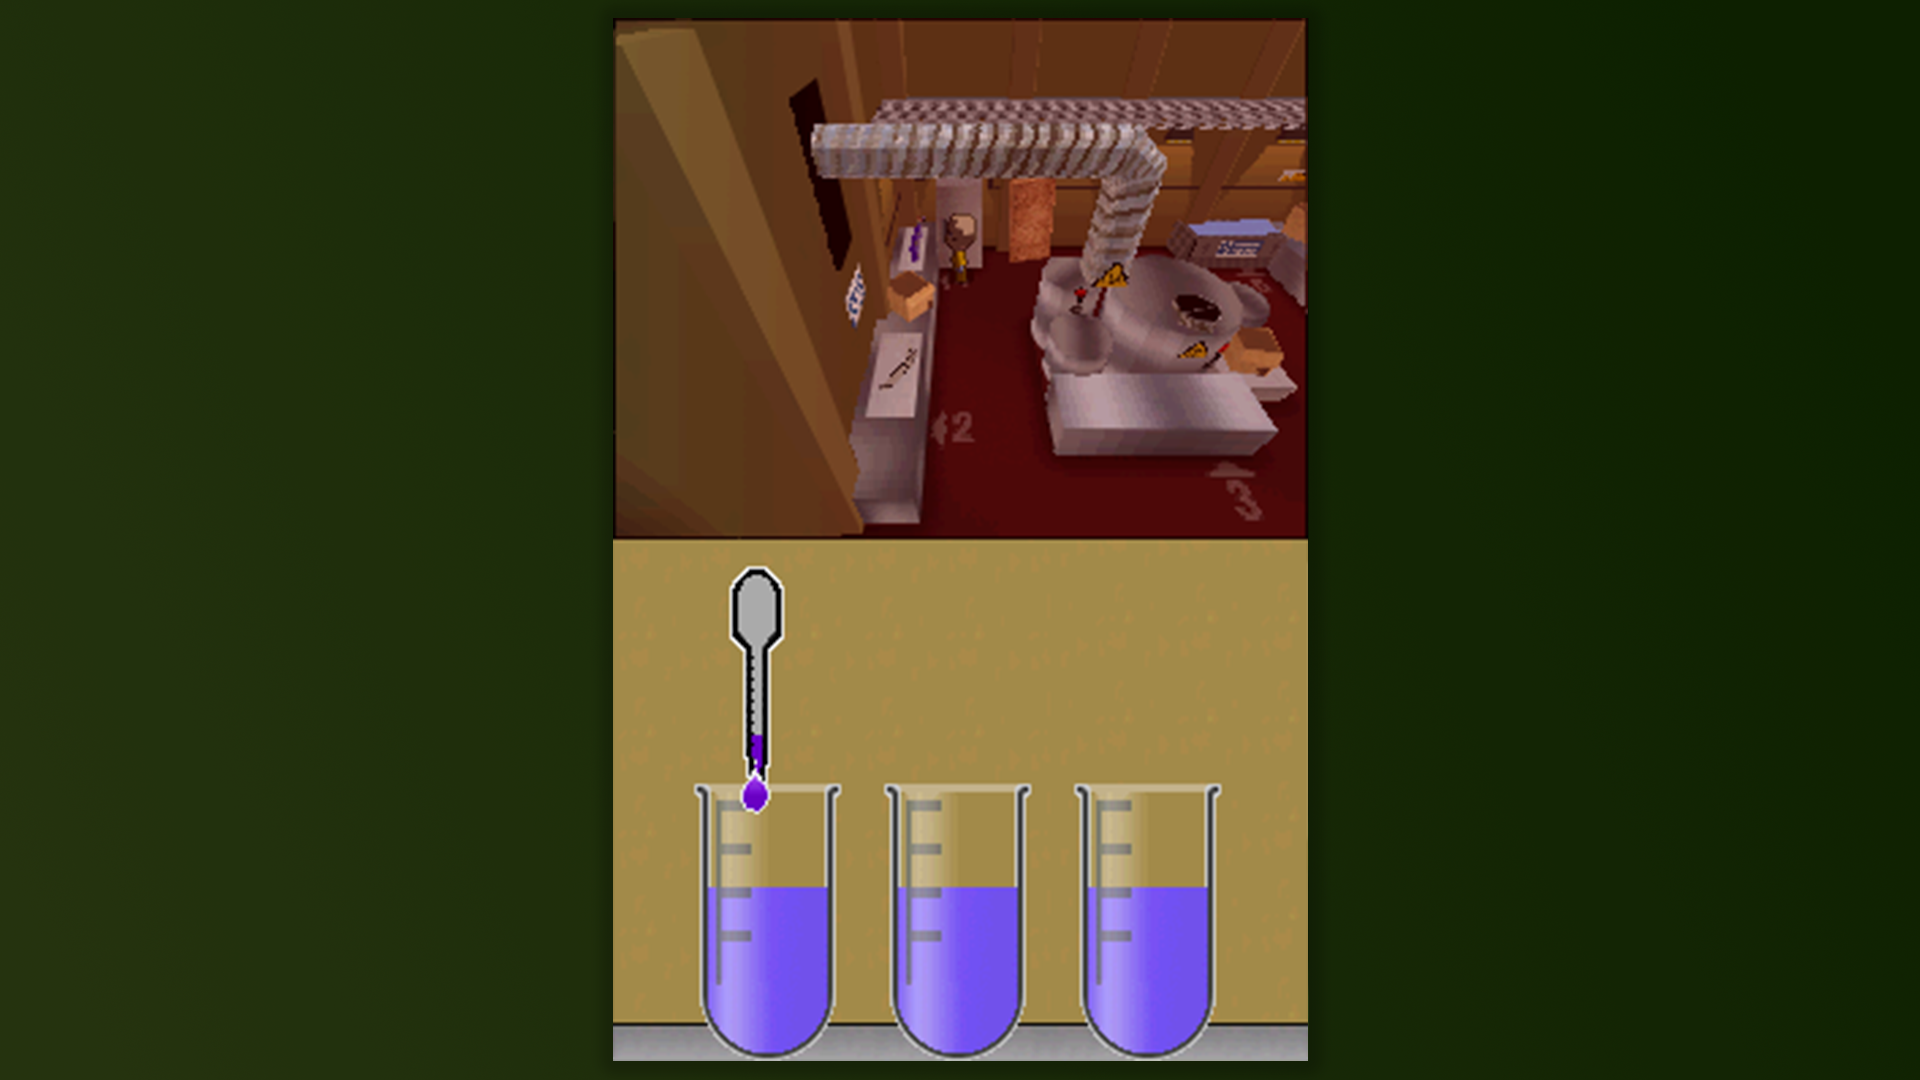 Gameplay of the pipette reagent minigame